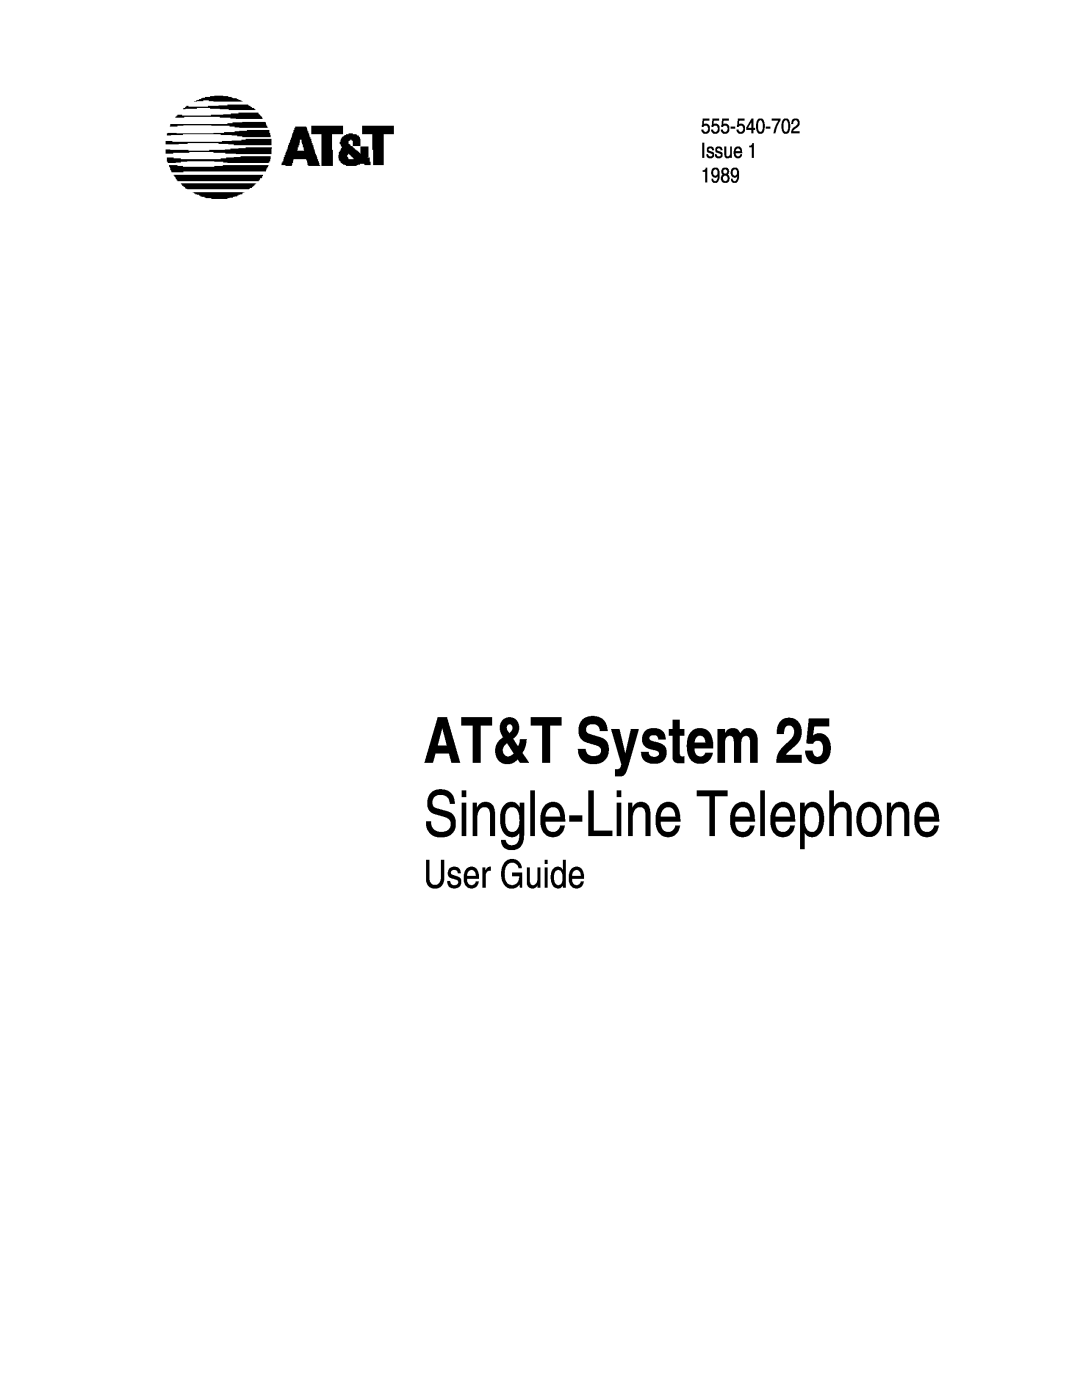 3D Connexion 555-540-702 manual AT&T System, Single-LineTelephone, User Guide, Issue 